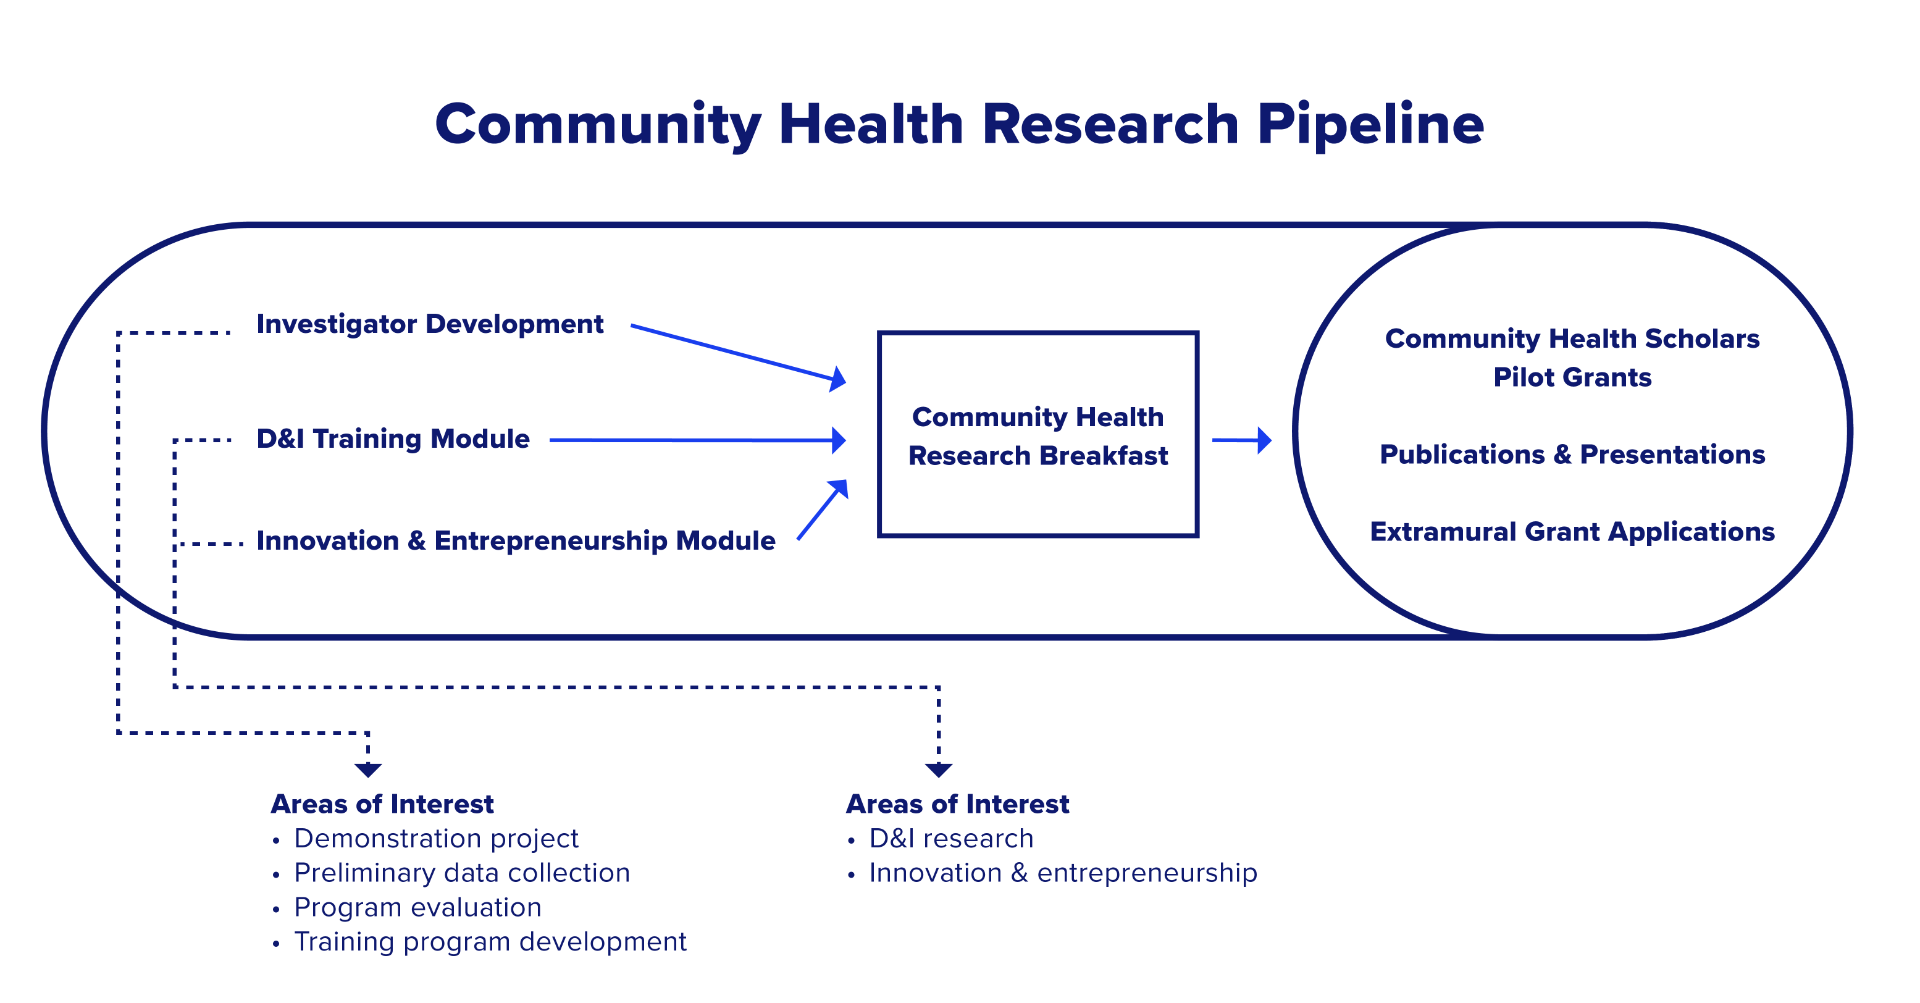 This diagram is a flow chart which depicts the UAB CSCH's Community Health Research Pipeline